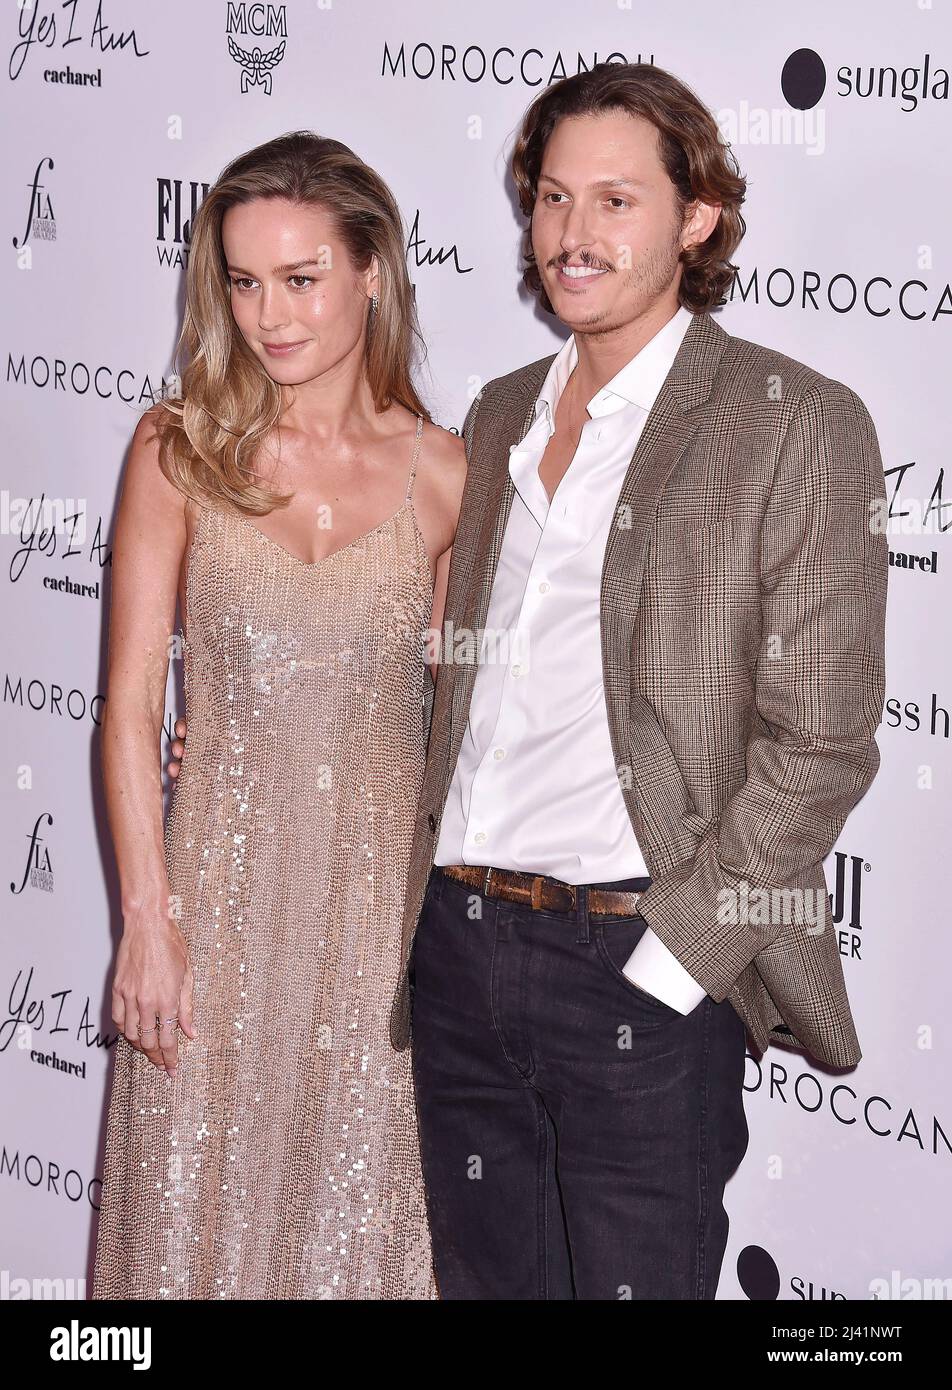 Beverly Hills, Ca. 10th Apr, 2022. (L-R) Brie Larson and Elijah Allan-Blitz attend The Daily Front Row's 6th Annual Fashion Los Angeles Awards at Beverly Wilshire, A Four Seasons Hotel on April 10, 2022 in Beverly Hills, California. Credit: Jeffrey Mayer/Jtm Photos/Media Punch/Alamy Live News Stock Photo